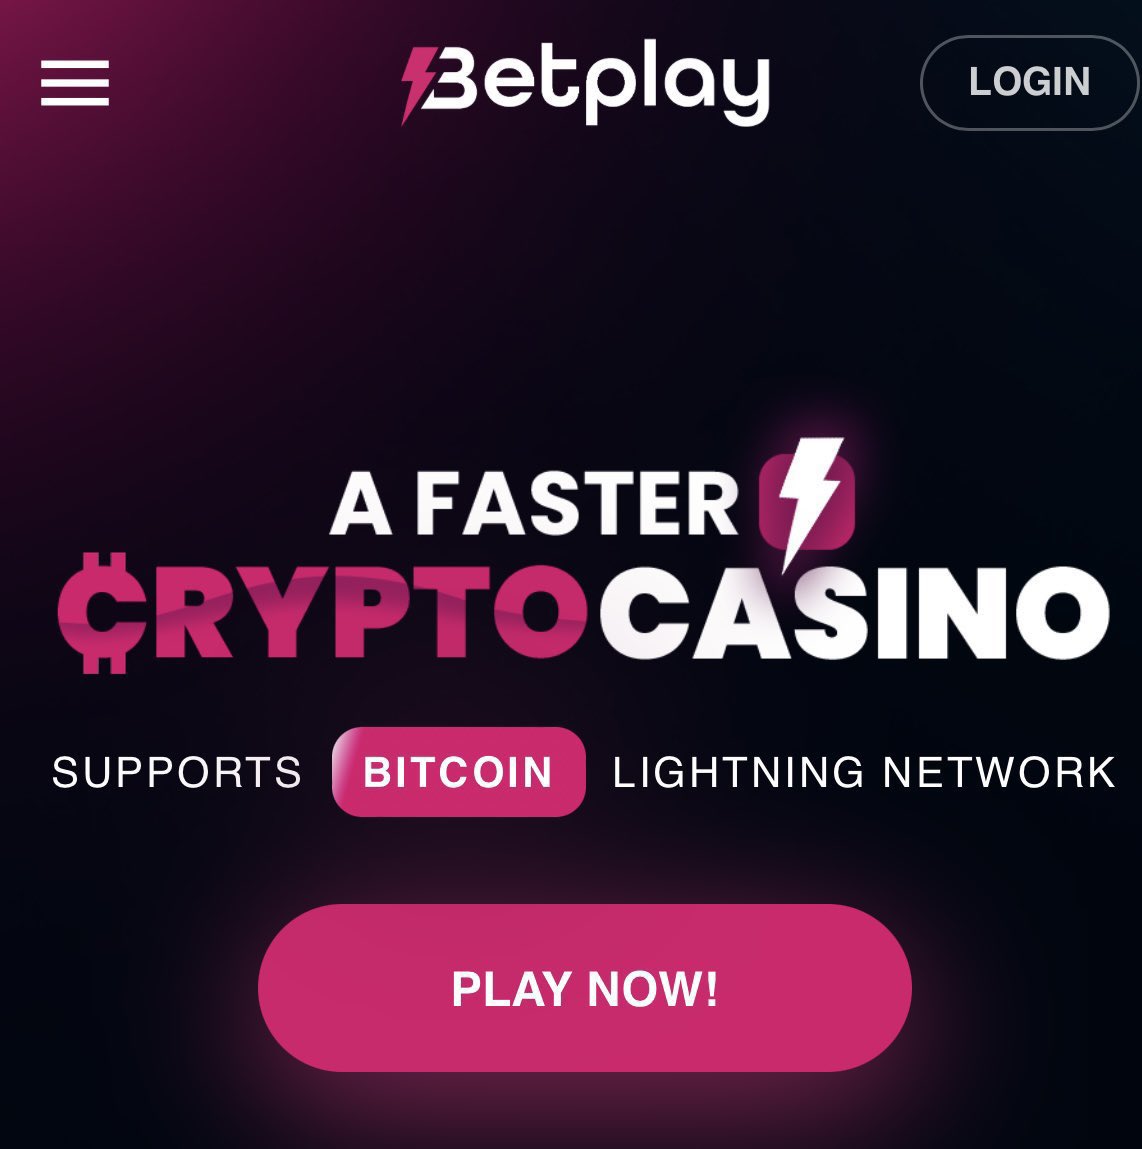 Join BetPlay Crypto Casinj and Get 100% Welcome Bonus Up To 50,000 mBTC 🎁

👉 onlinecasinospace.com/betplay-casino

#onlinecasinospace #onlinecasino #casino #casinoonline #cryptocasino #bonus #cryptobonus #bitcoin   #ethereum #litecoin #tether #casinobonus #bonuscasino